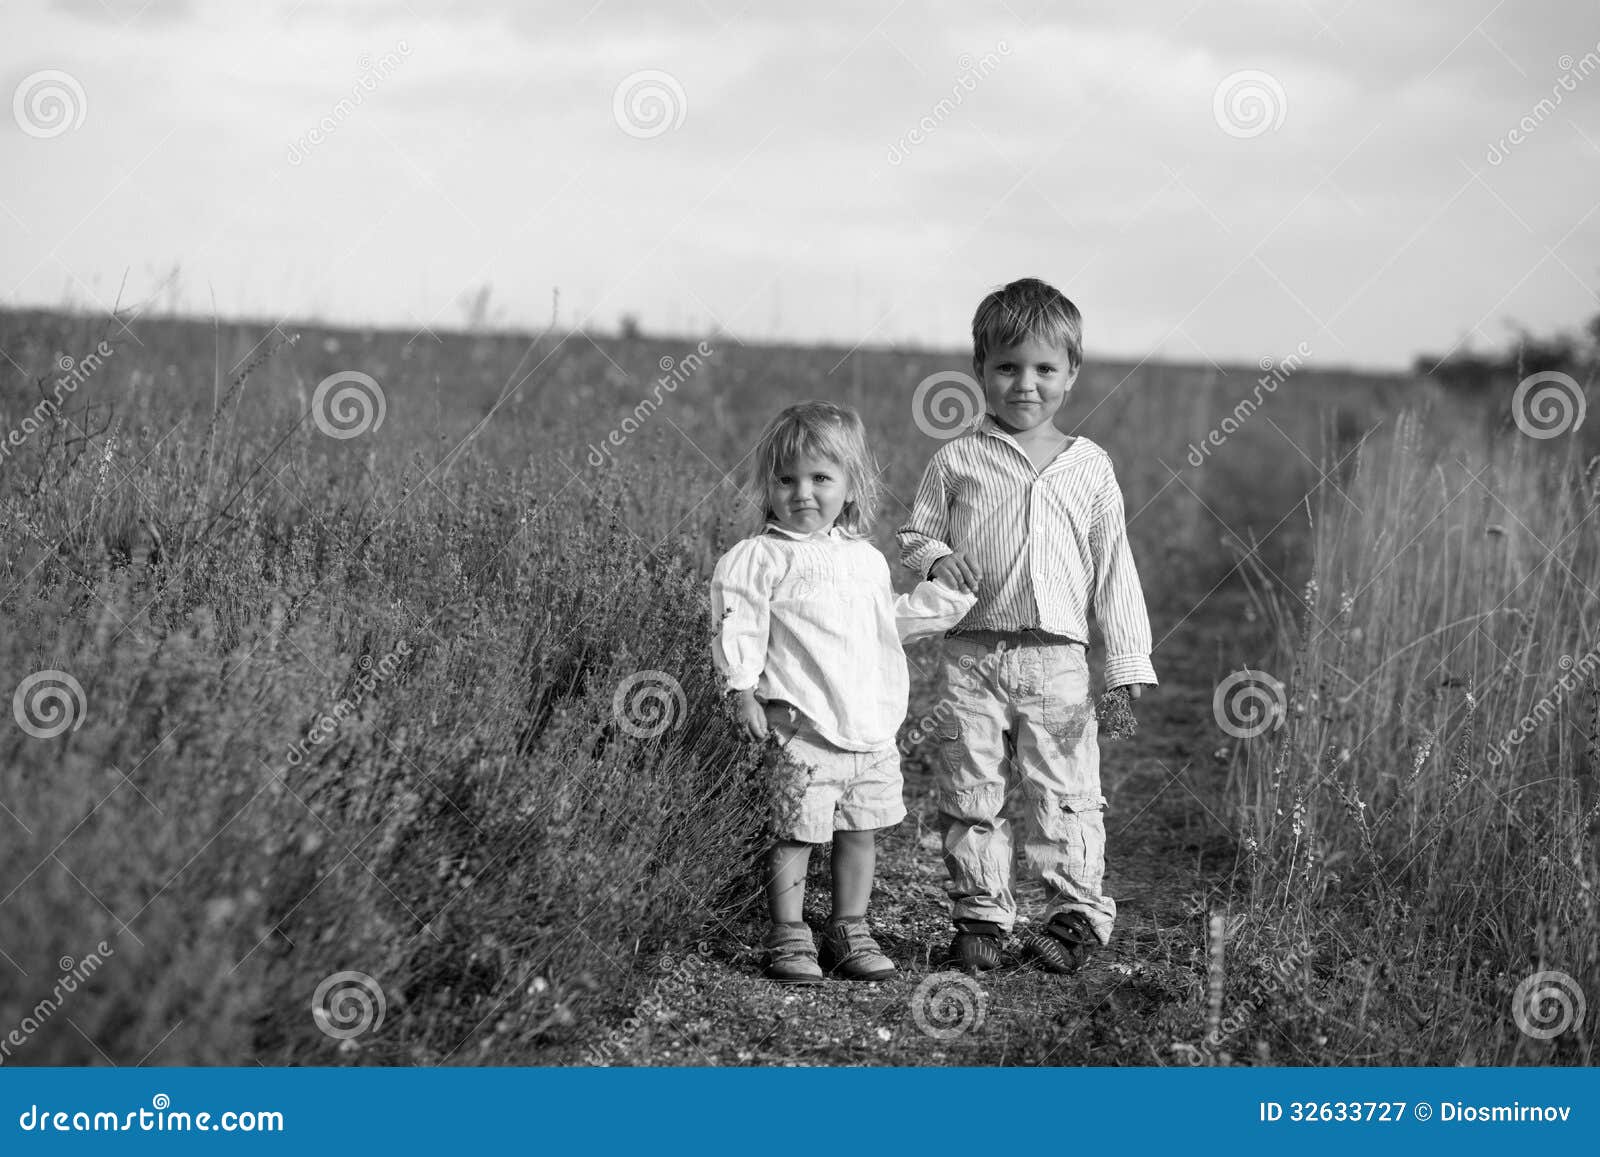 Charming Children on Lavender Field at Sunset Stock Image - Image of ...